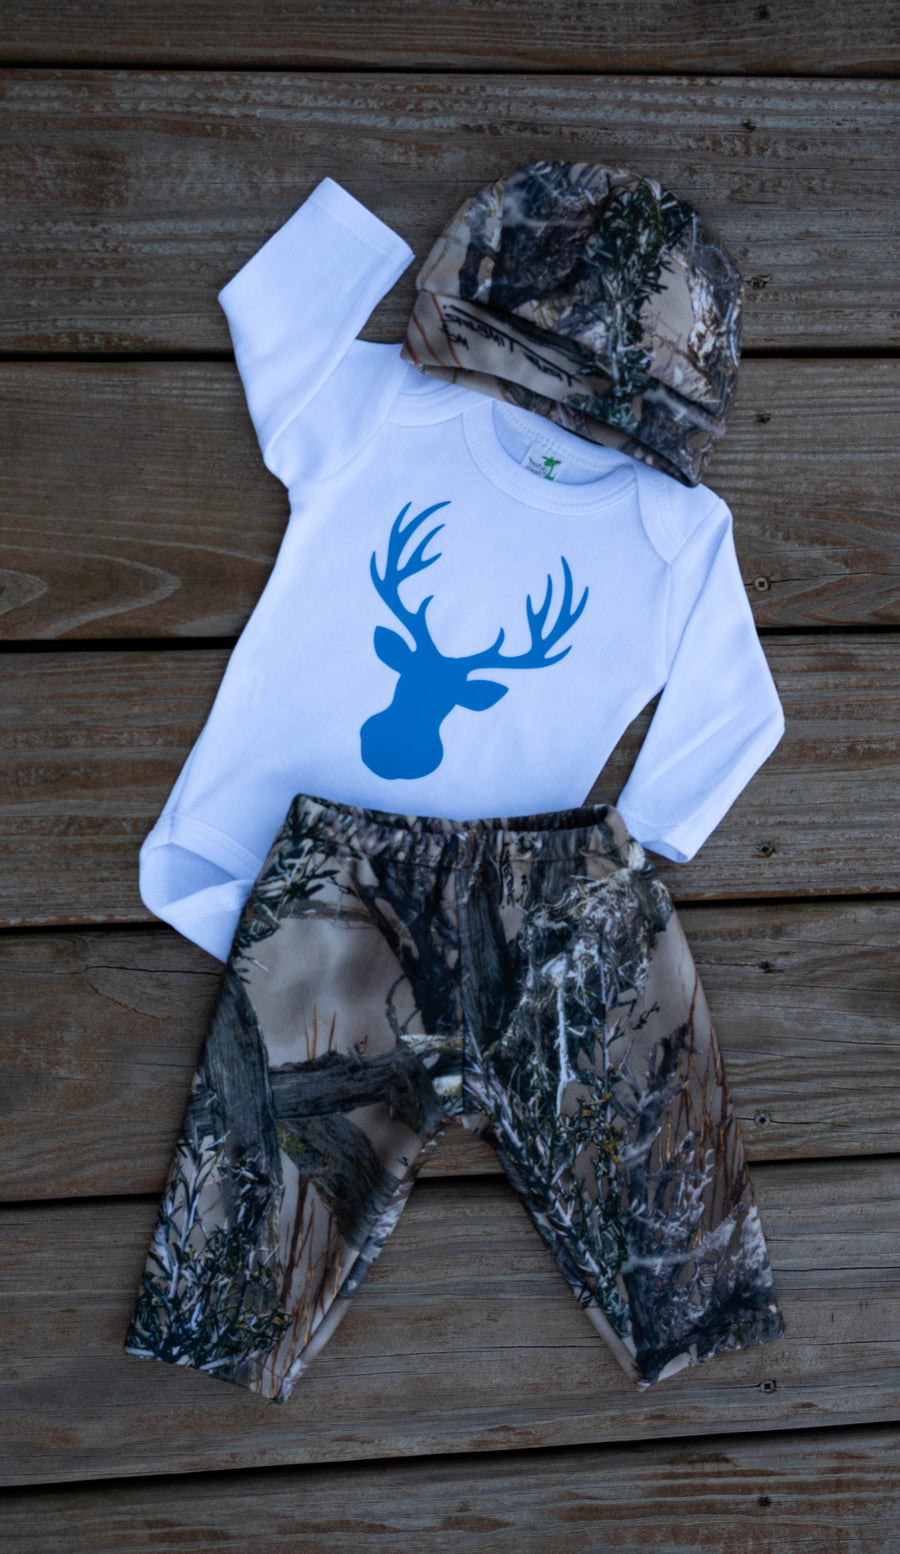 TakeATote LLC Camo Buck Gold Pant Set 0-3 Months / Long Sleeve / Natural with Blue Buck